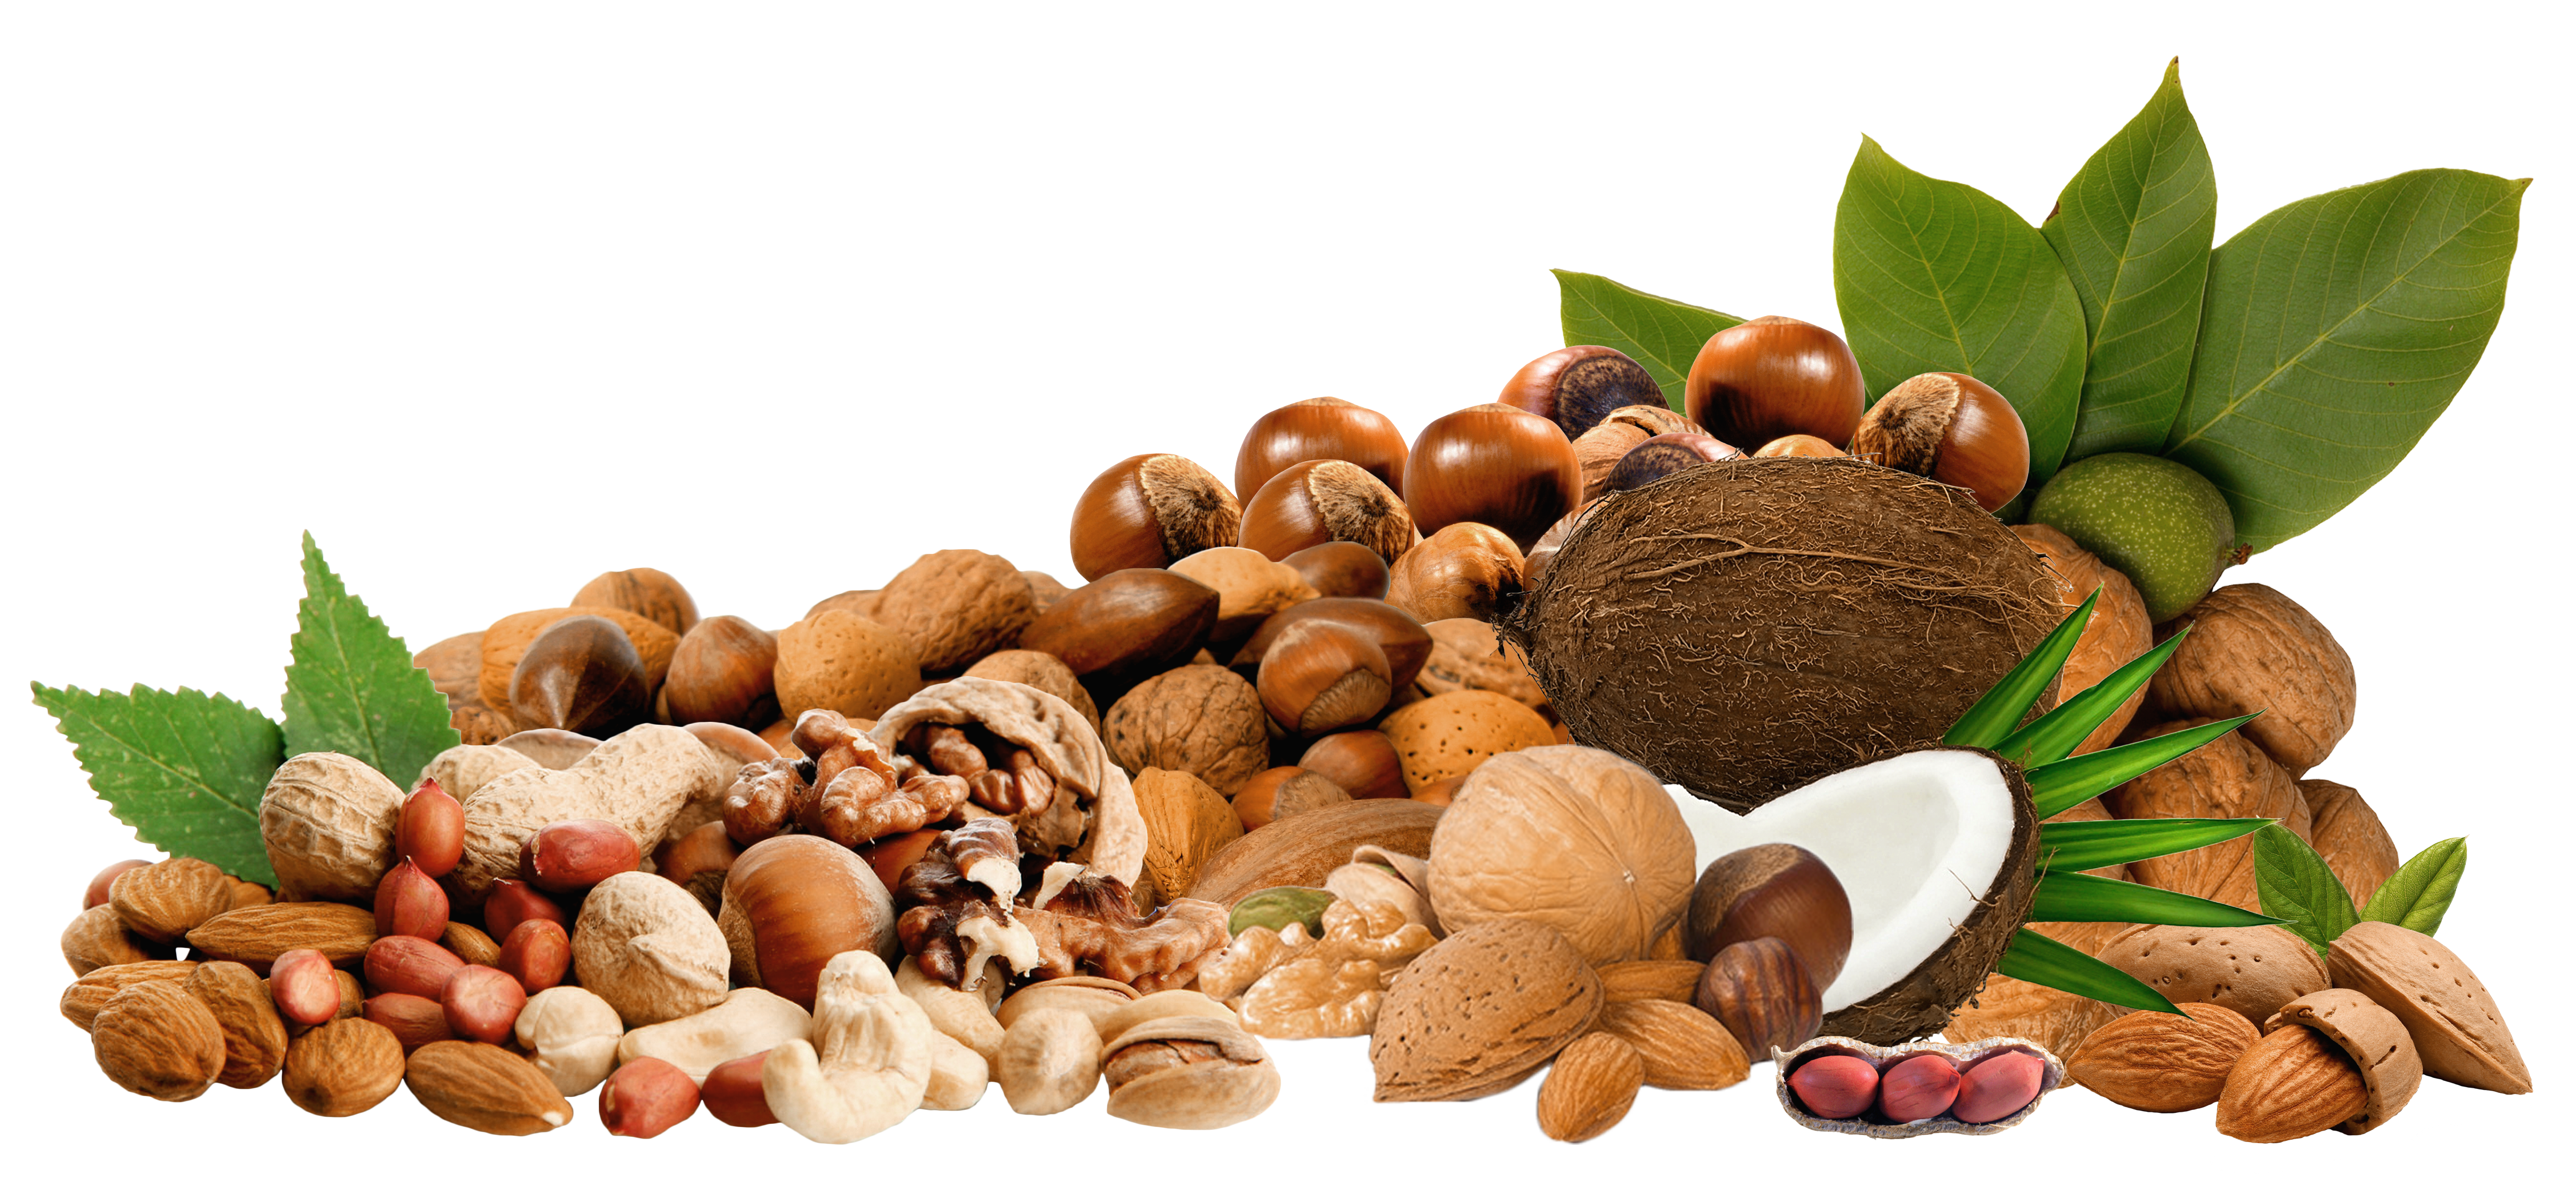 foods clipart nuts